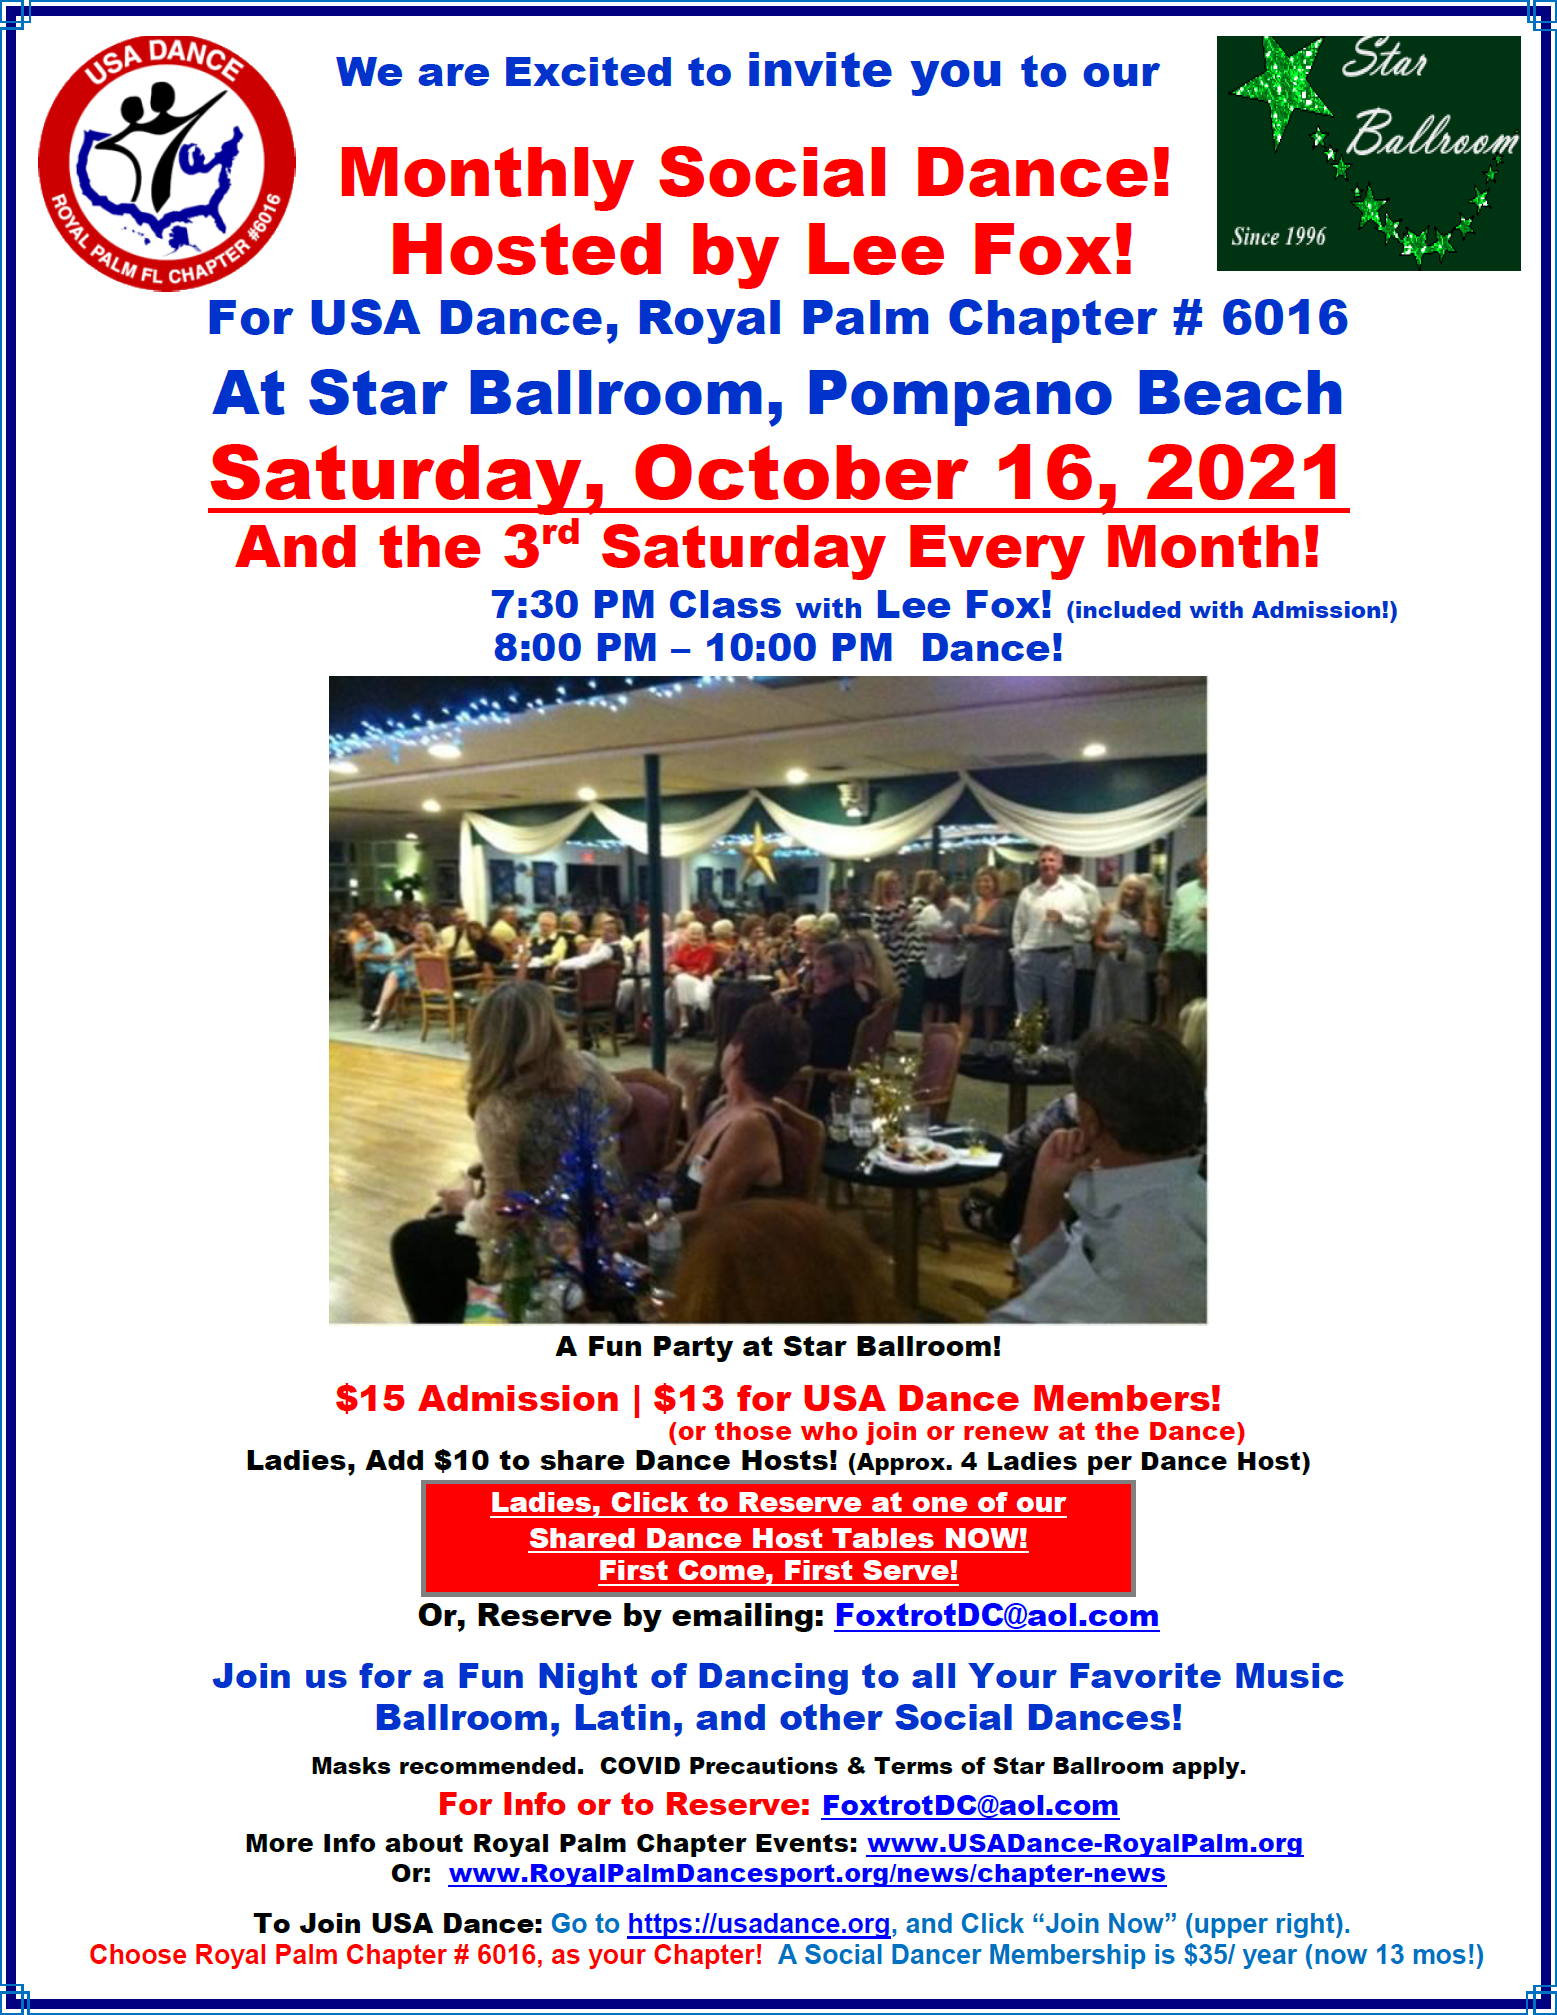 October 16, 2021 - USA Dance Royal Palm Chapter Social Dance at Star Ballroom - Hosted by Lee Fox!